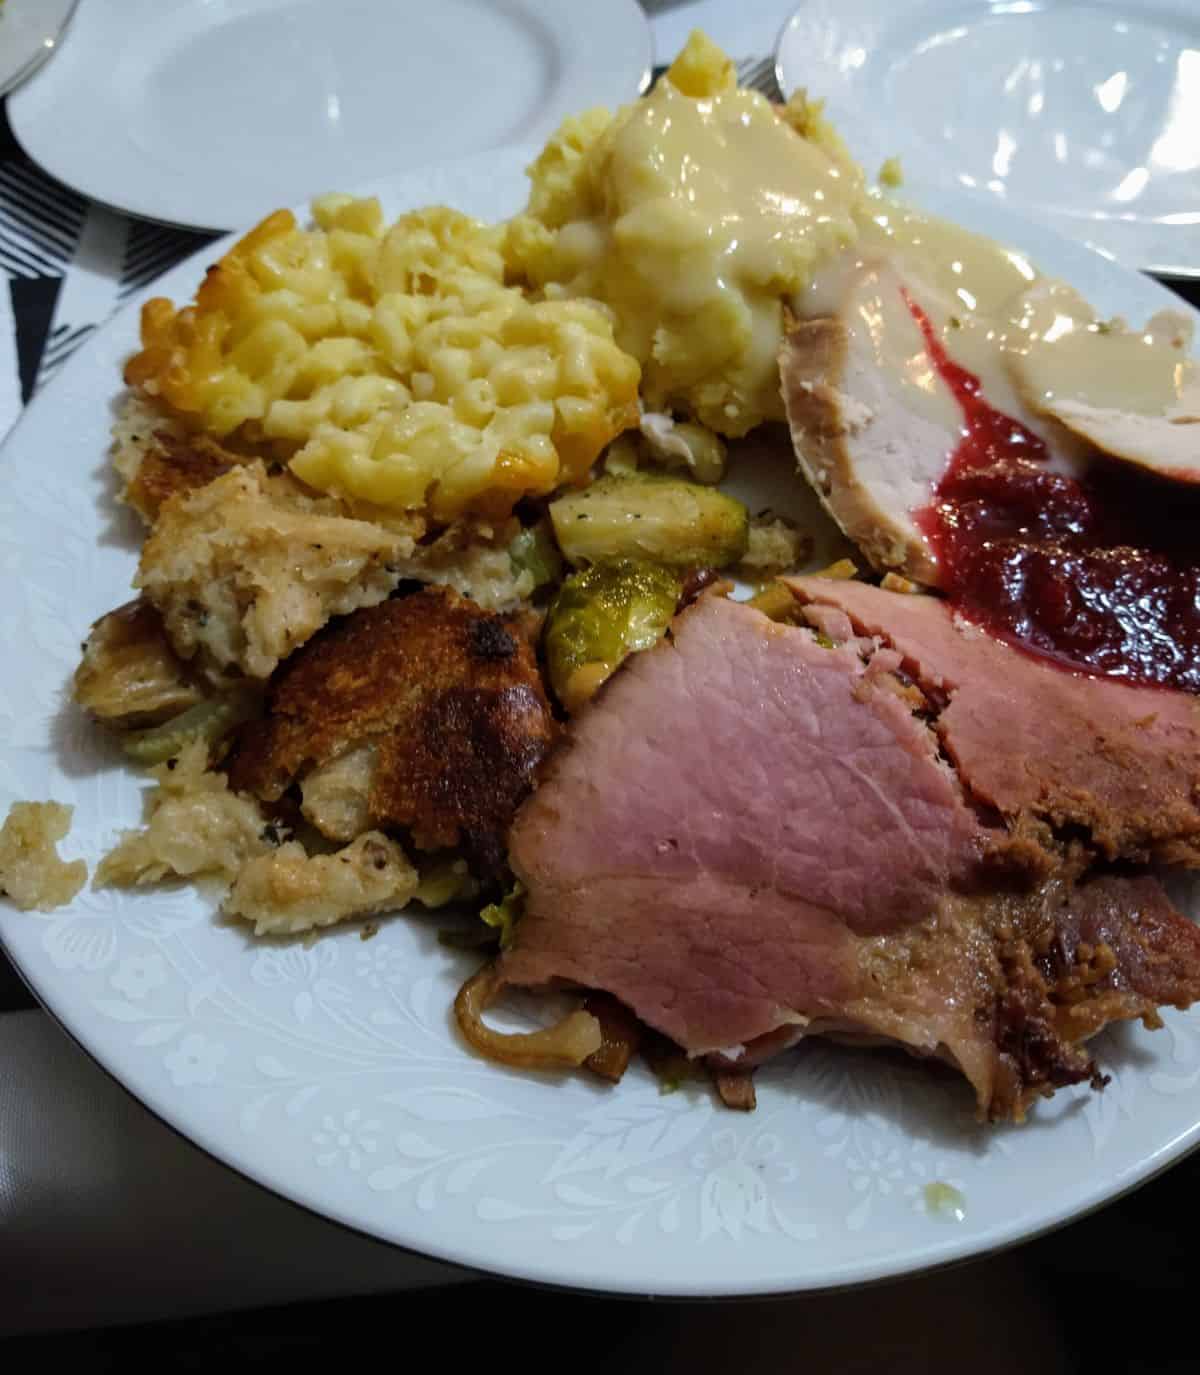 A white plate with Thanksgiving food on it including ham, turkey, cranberry sauce, stuffing, mashed potatoes with gravy, and mac & cheese.